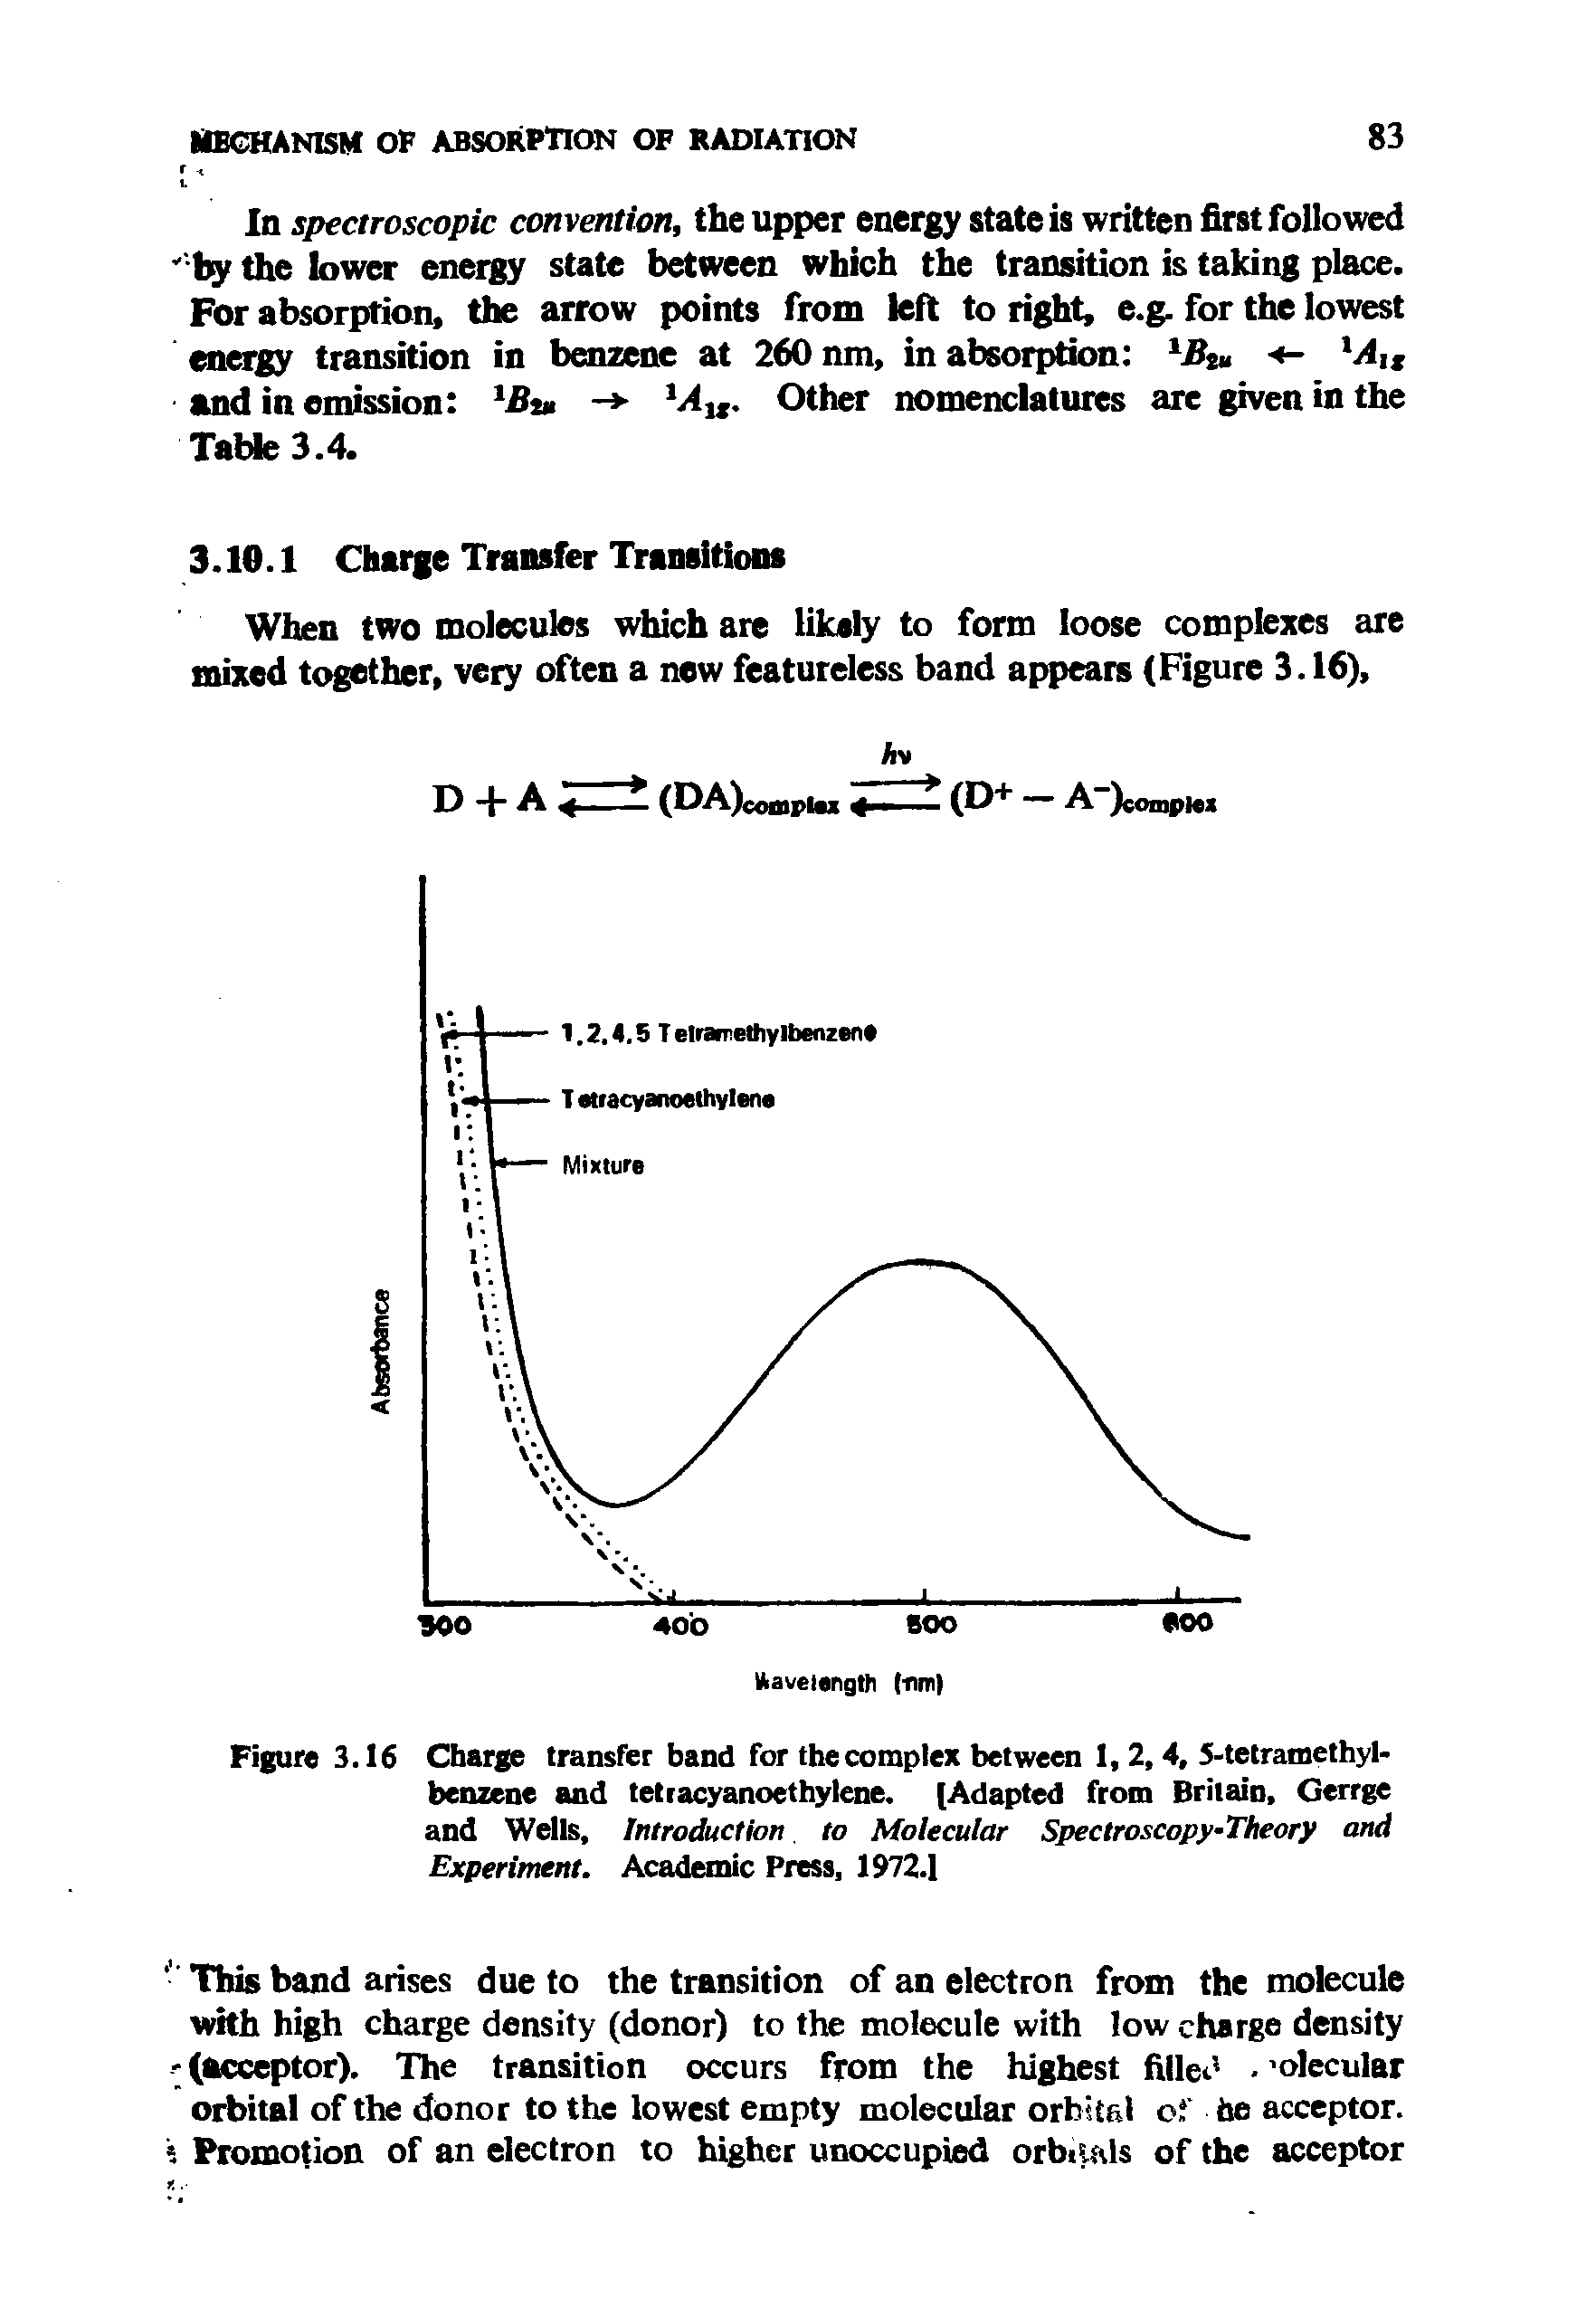 Figure 3.16 Charge transfer band for the complex between 1, 2, 4, 5-tetramethyl-benzene and tetiacyanoethylene. [Adapted from Britain. Gerrge and Wells, Introduction to Molecular Spectroscopy-Theory and Experiment. Academic Press, 1972.1...